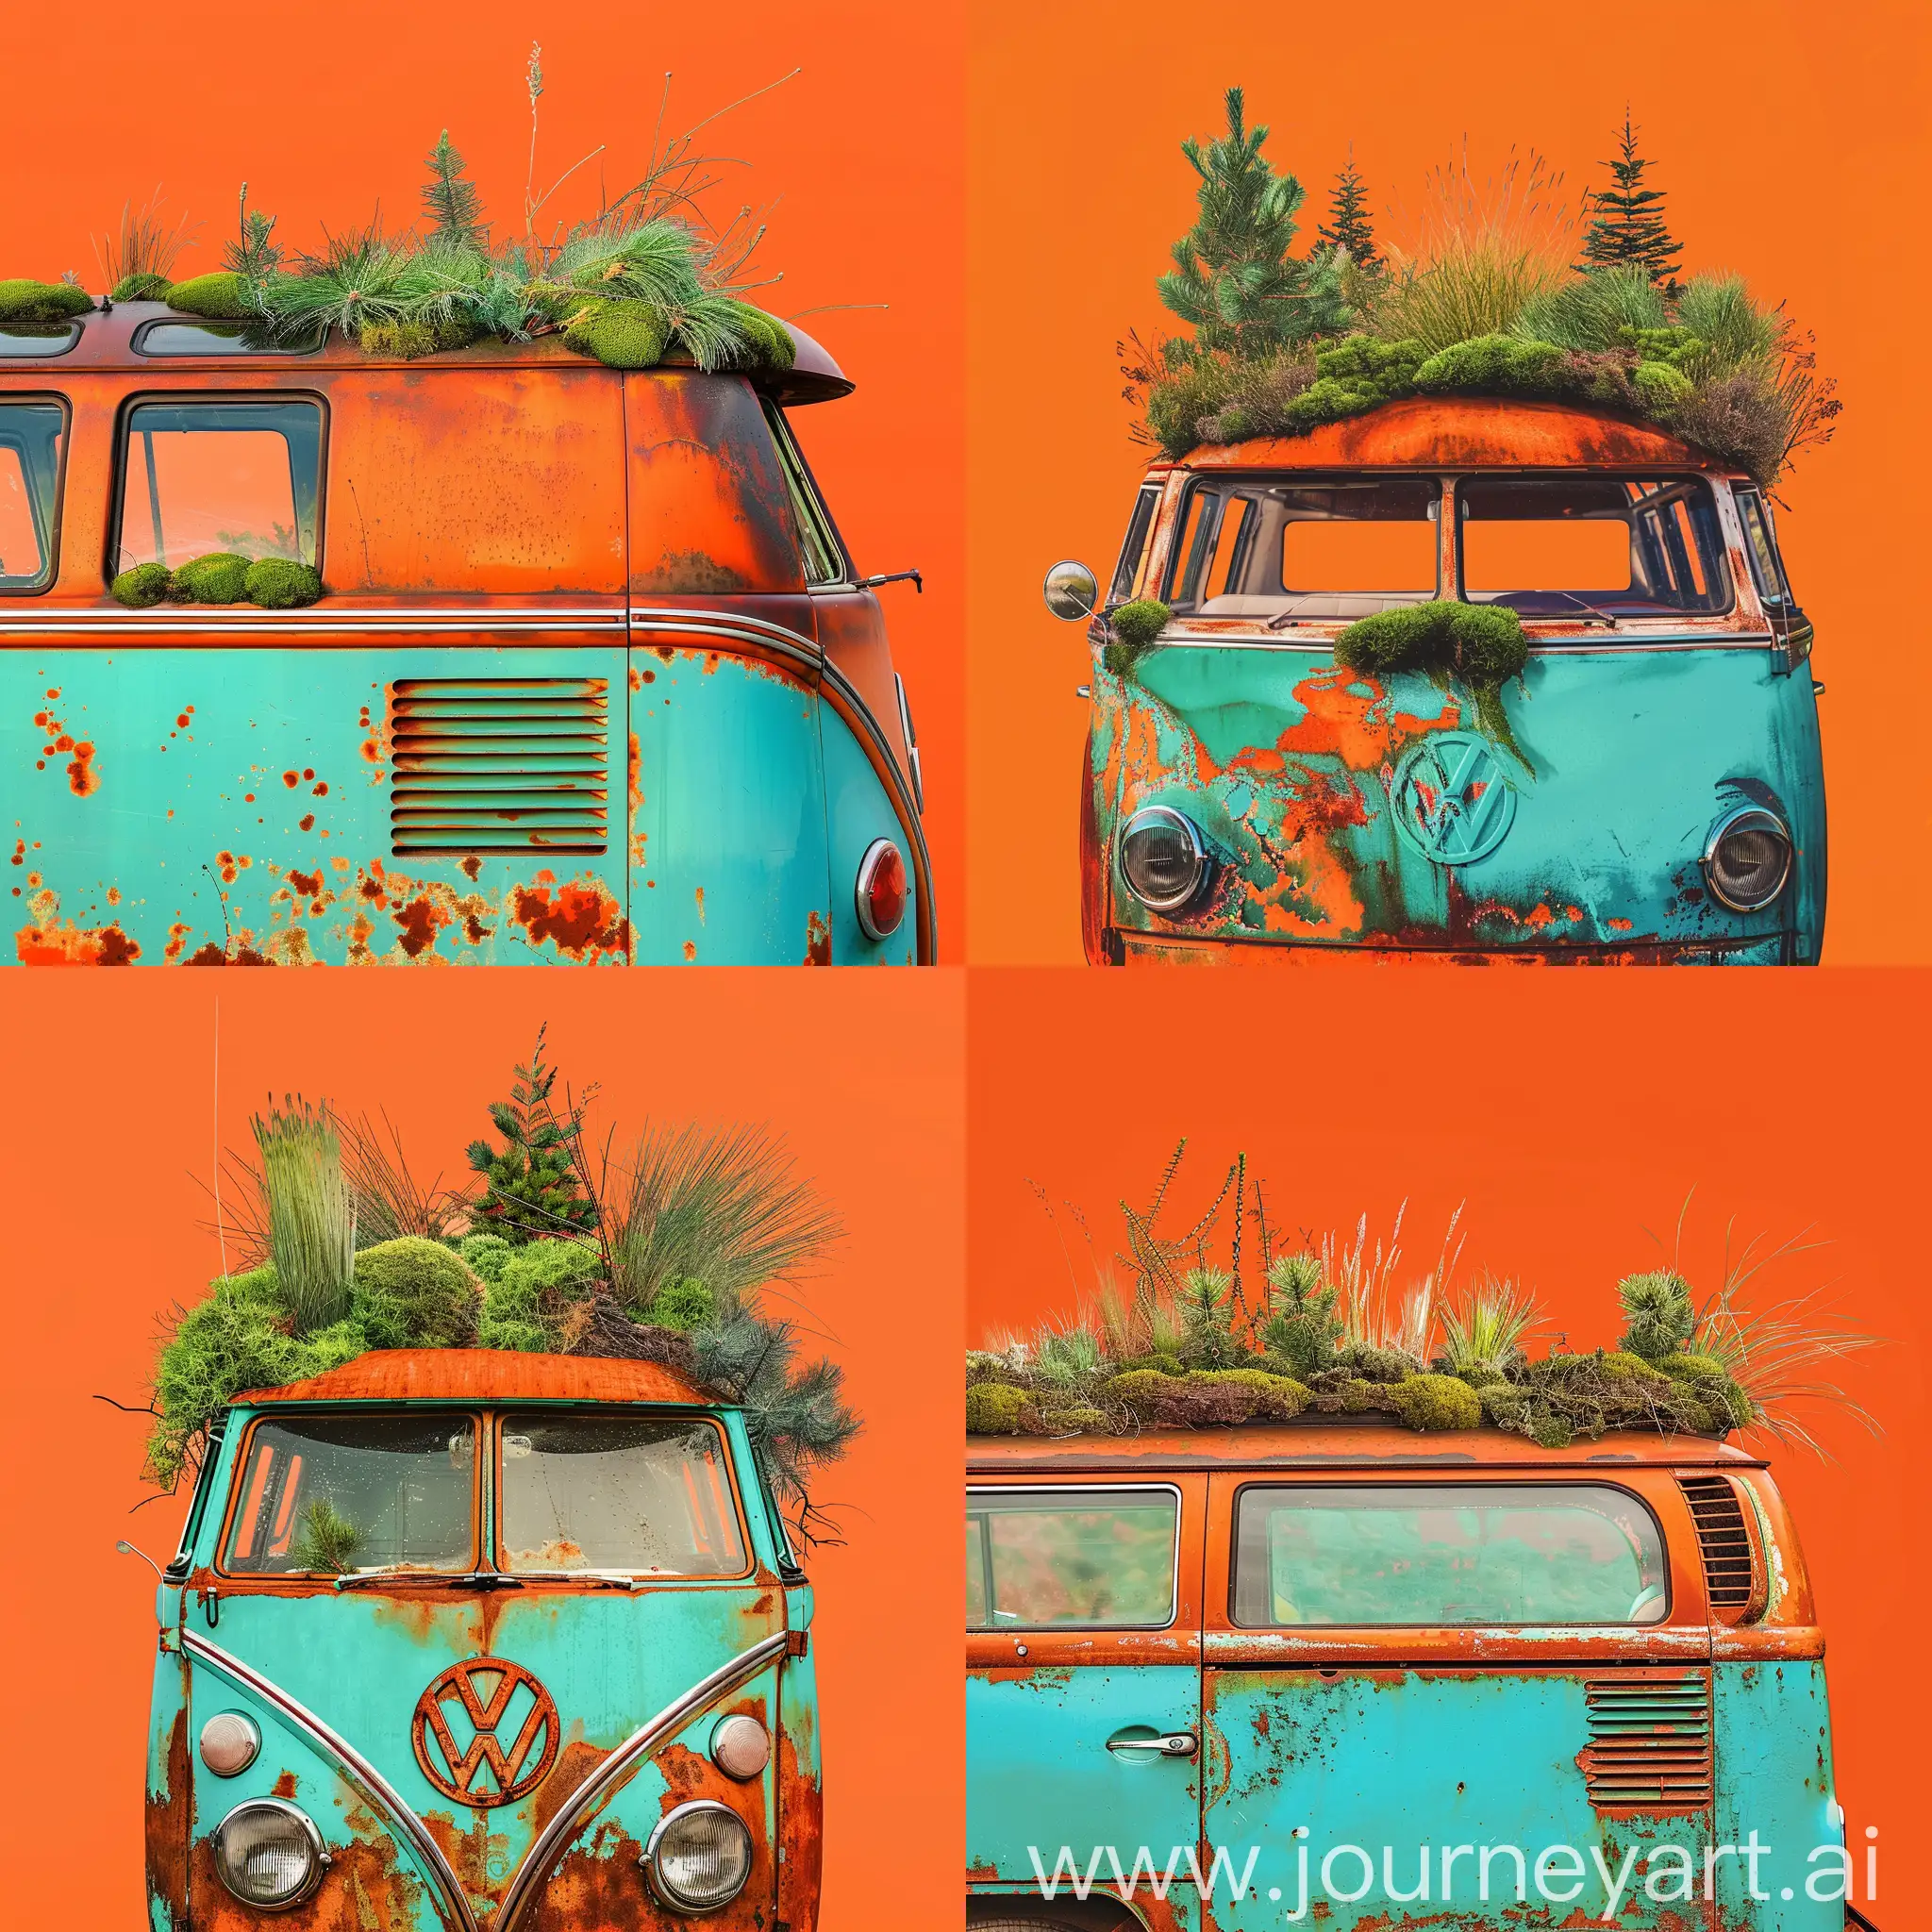 Bright orange background and in the middle of the picture is an old rust-colored, turquoise-blue volkswagen with grass, moss, grasses, and conifers growing on its roof.